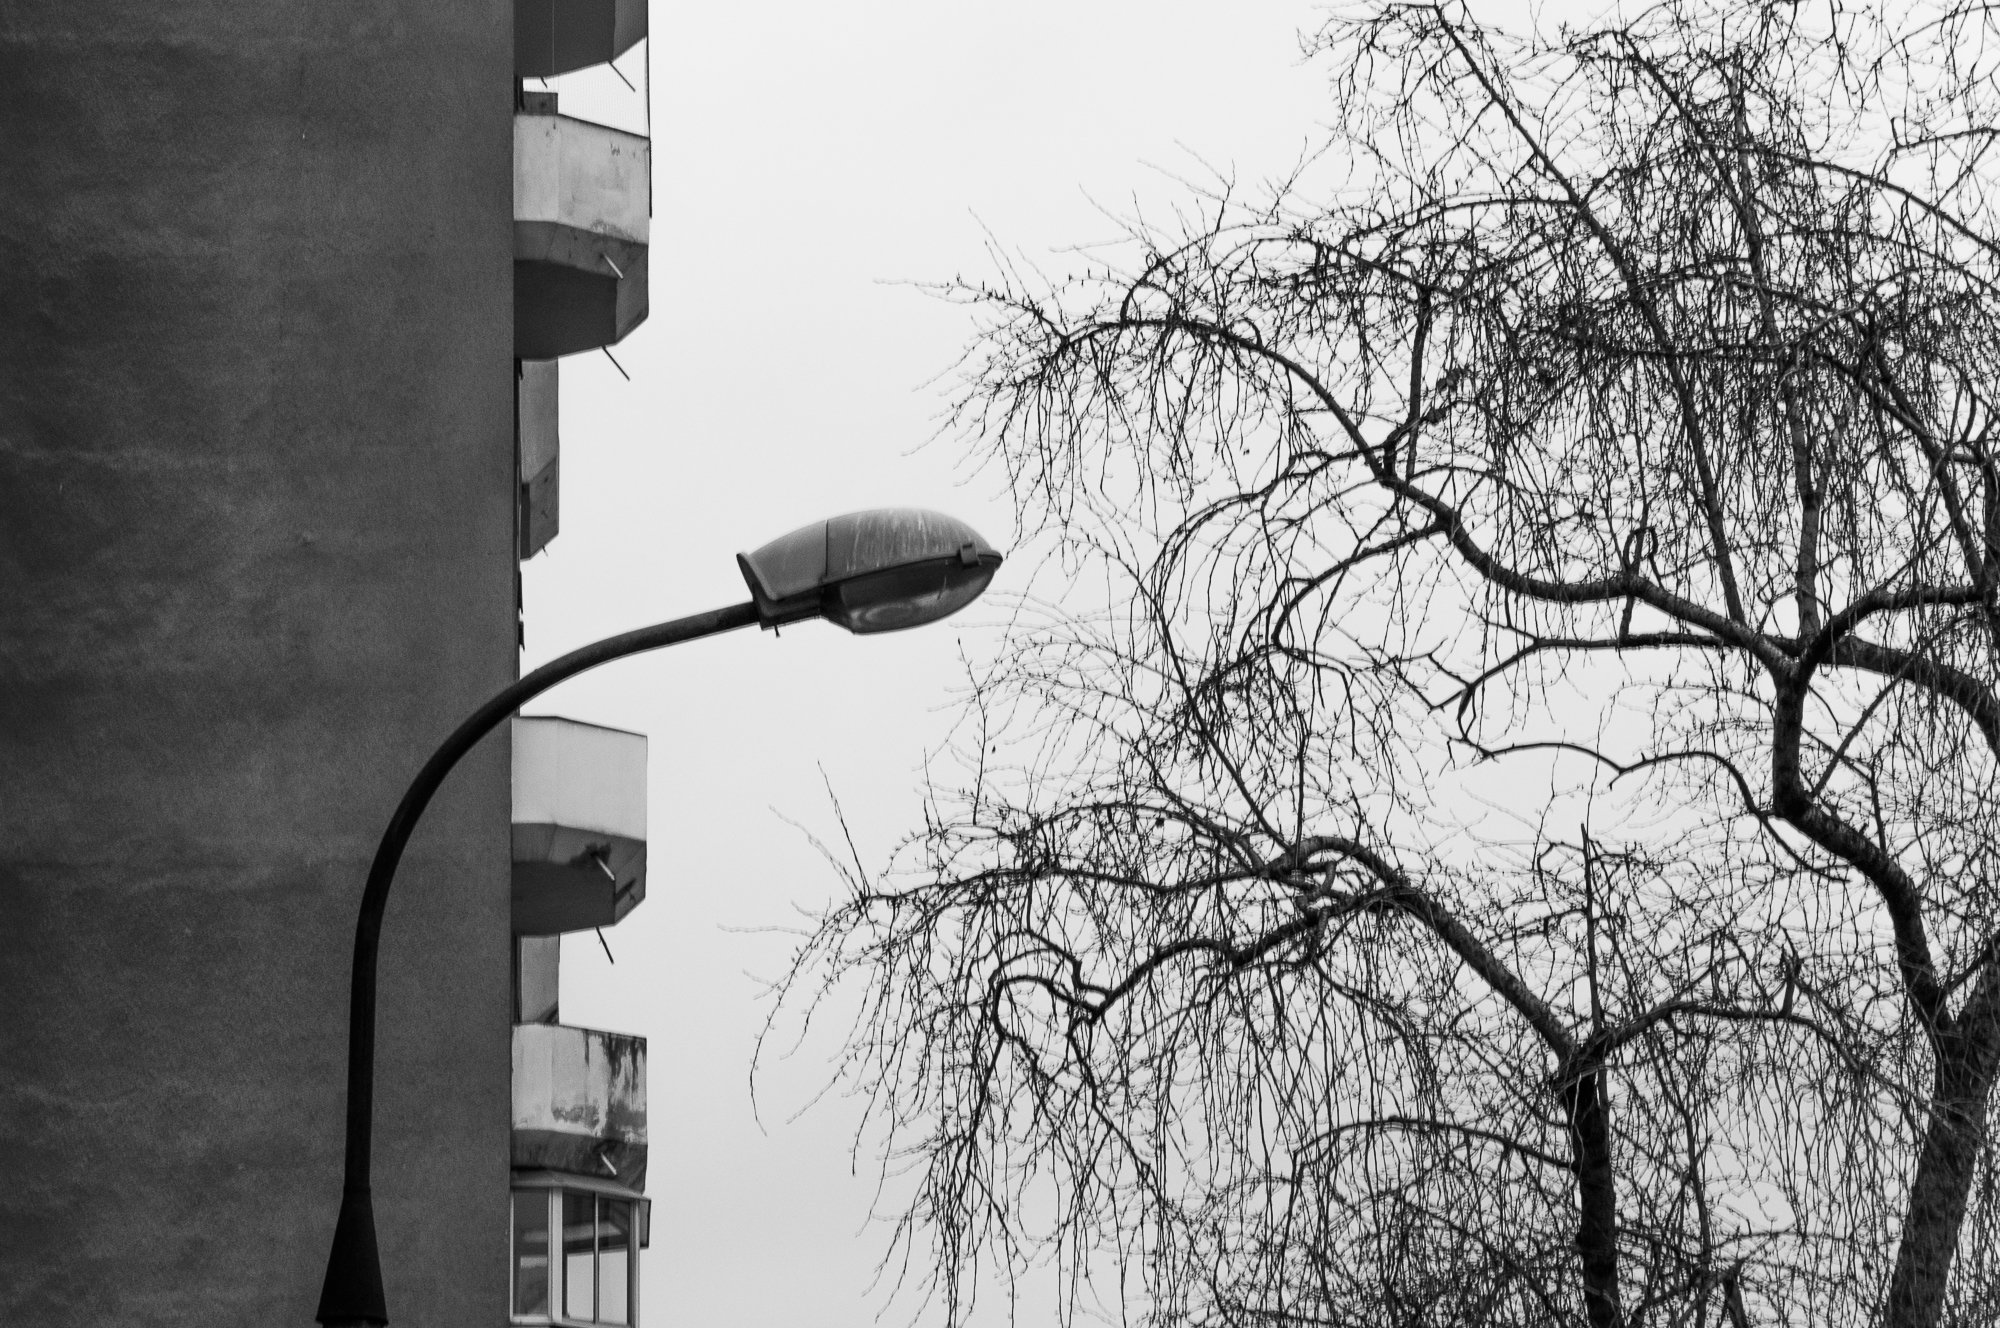 Adam Mazek Photography Warsaw (Warszawa) 2018. Post: "How to manage your time efficiently?" Perspective. Street lamp and trees.